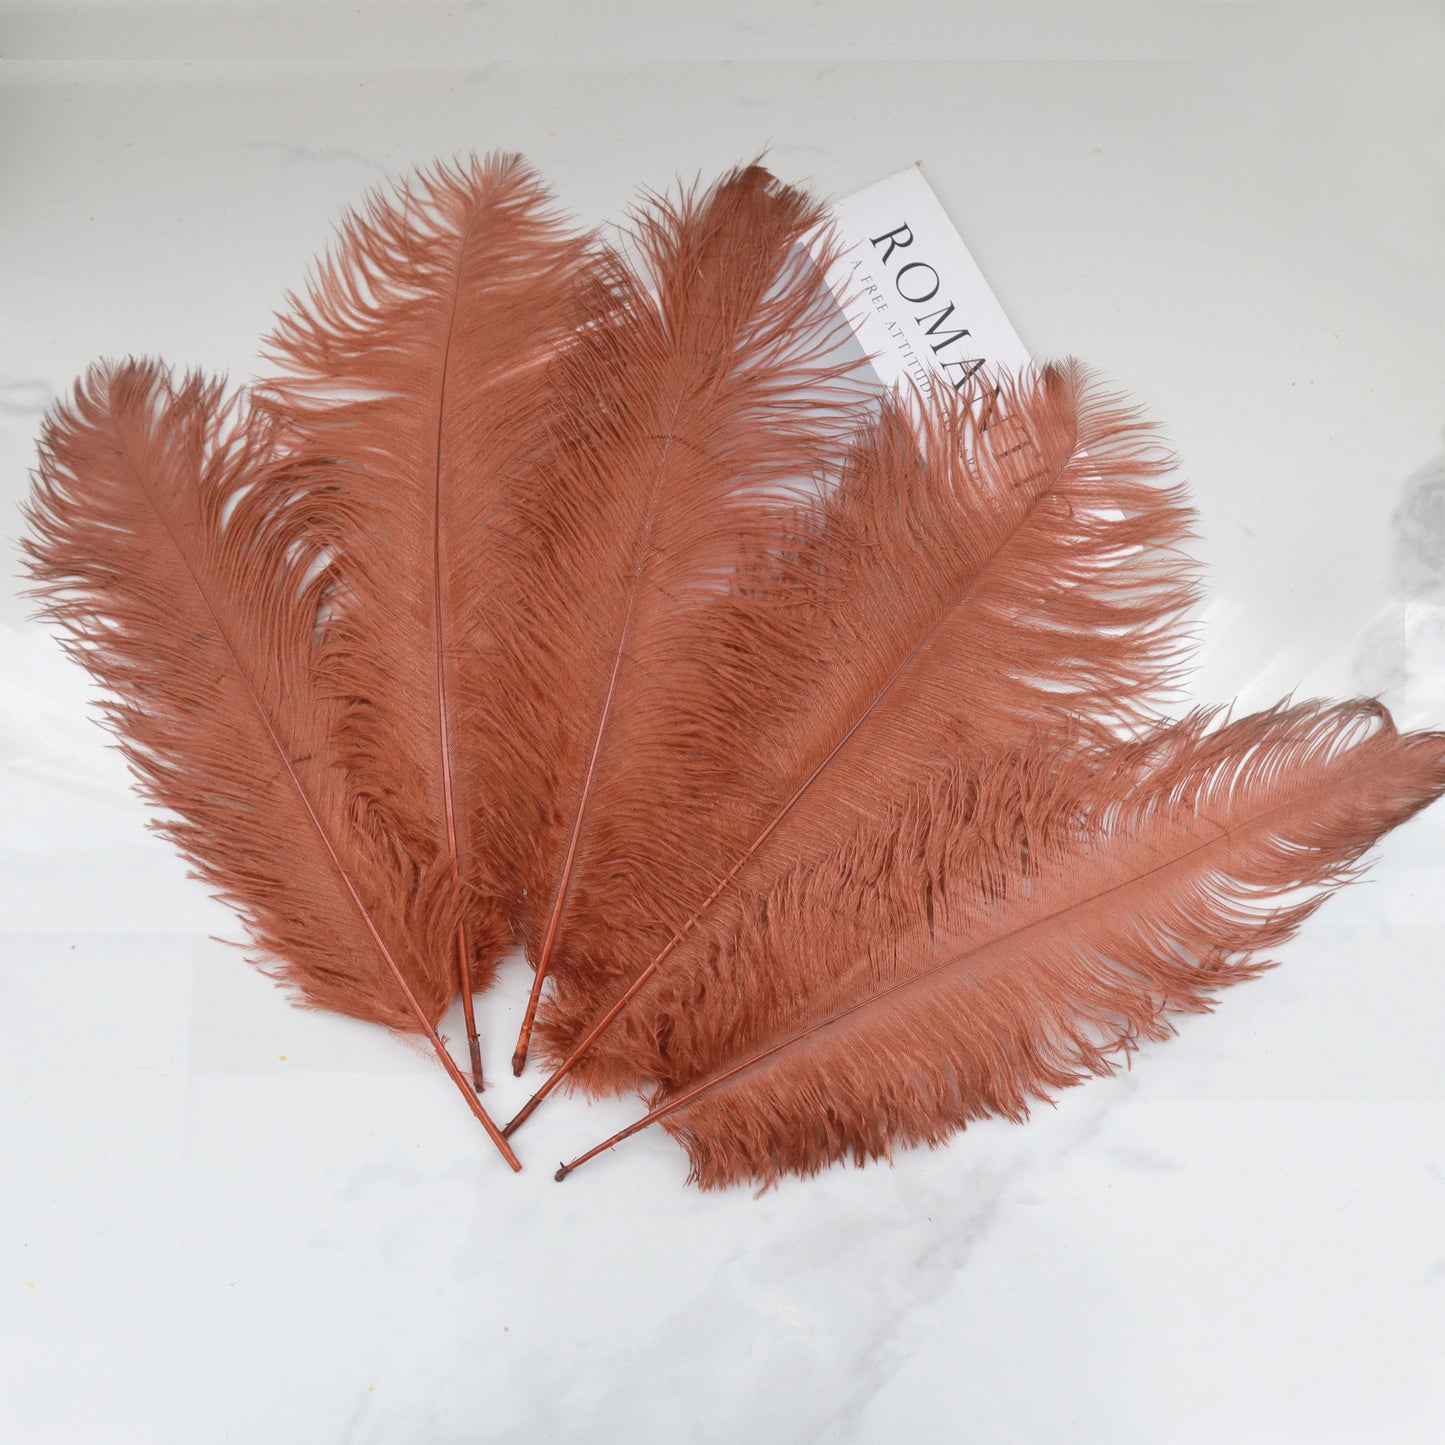 5 pcs Ostrich Feathers Brown